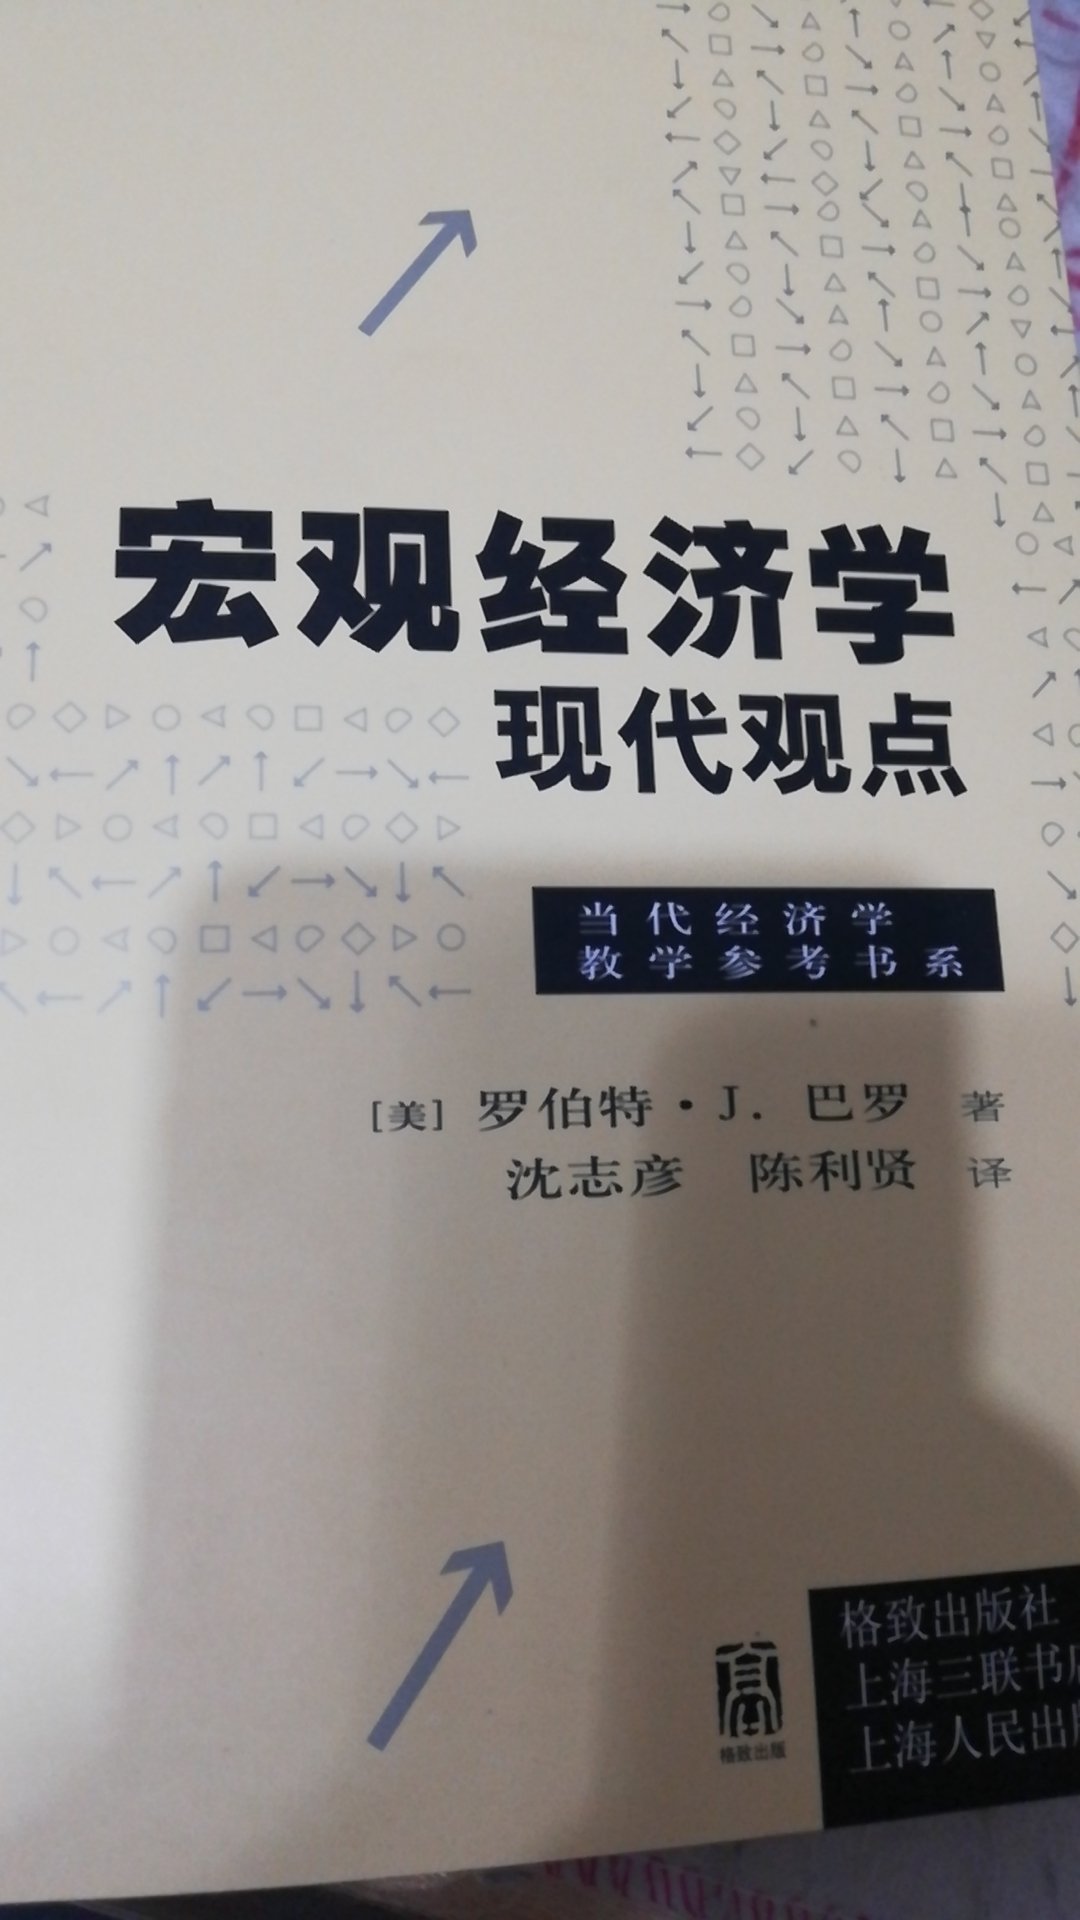 The quality of the book is good, and I\'ll finish it as soon as I can.